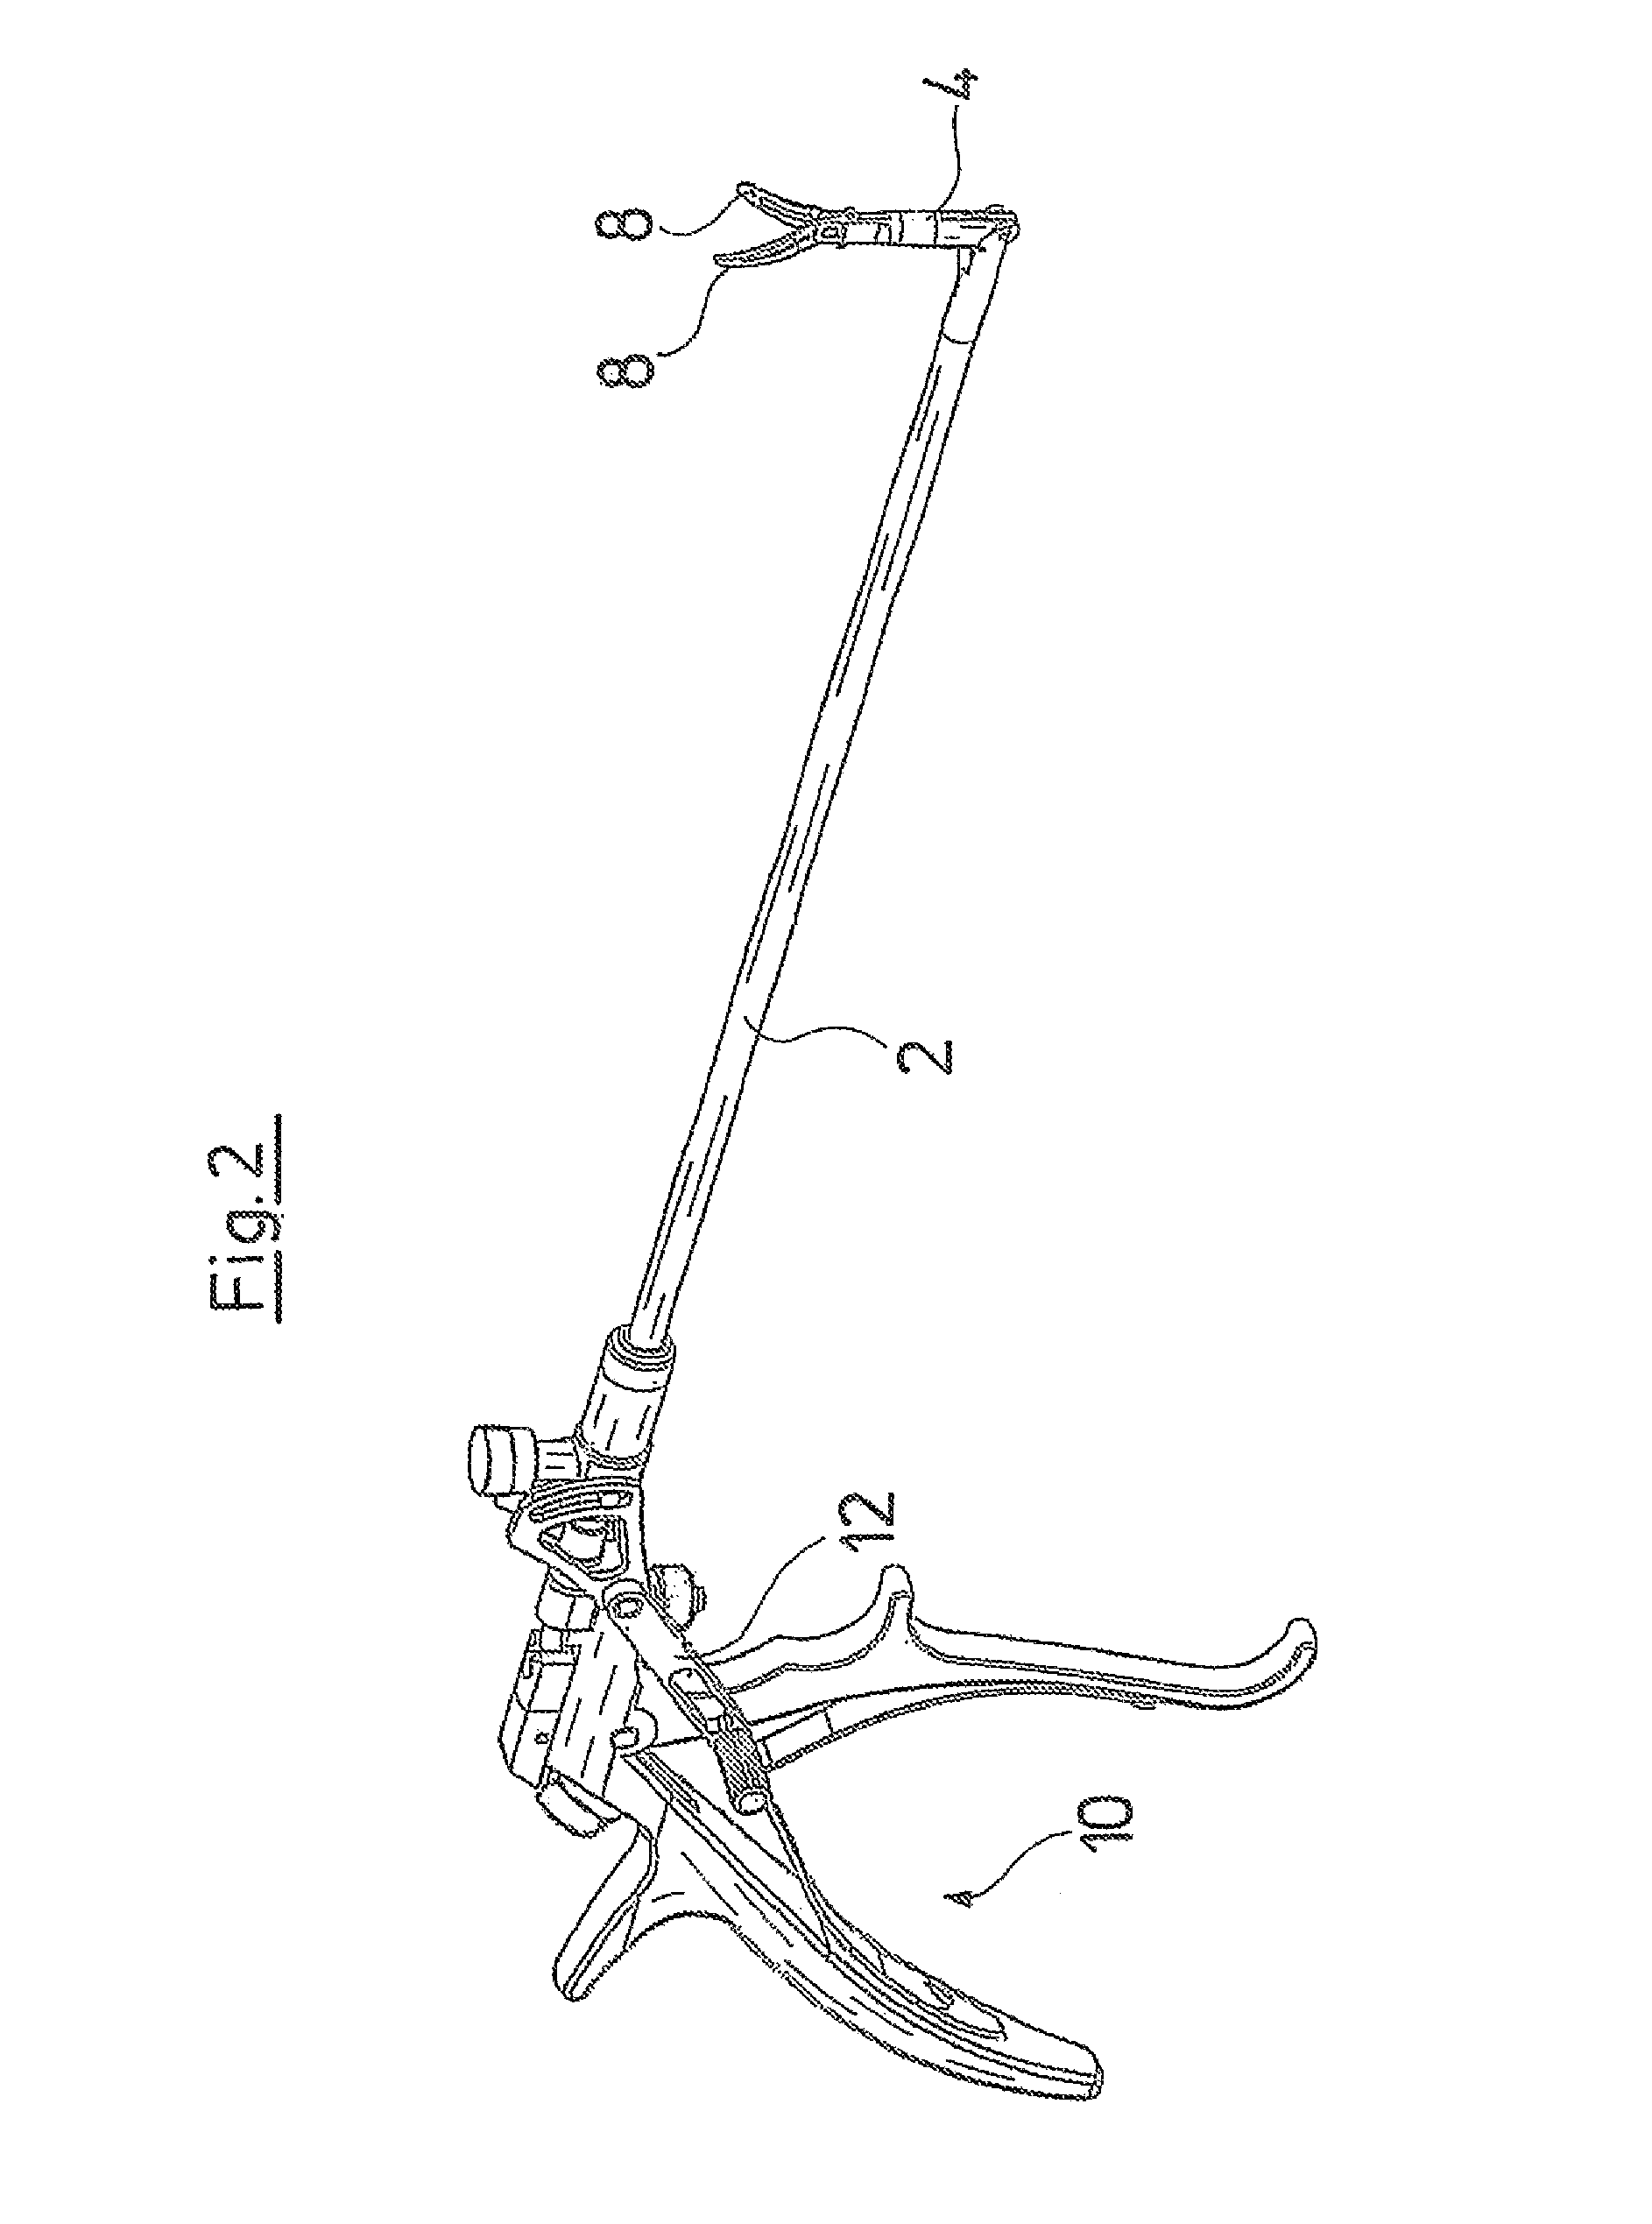 Medical instrument with multi-joint arm